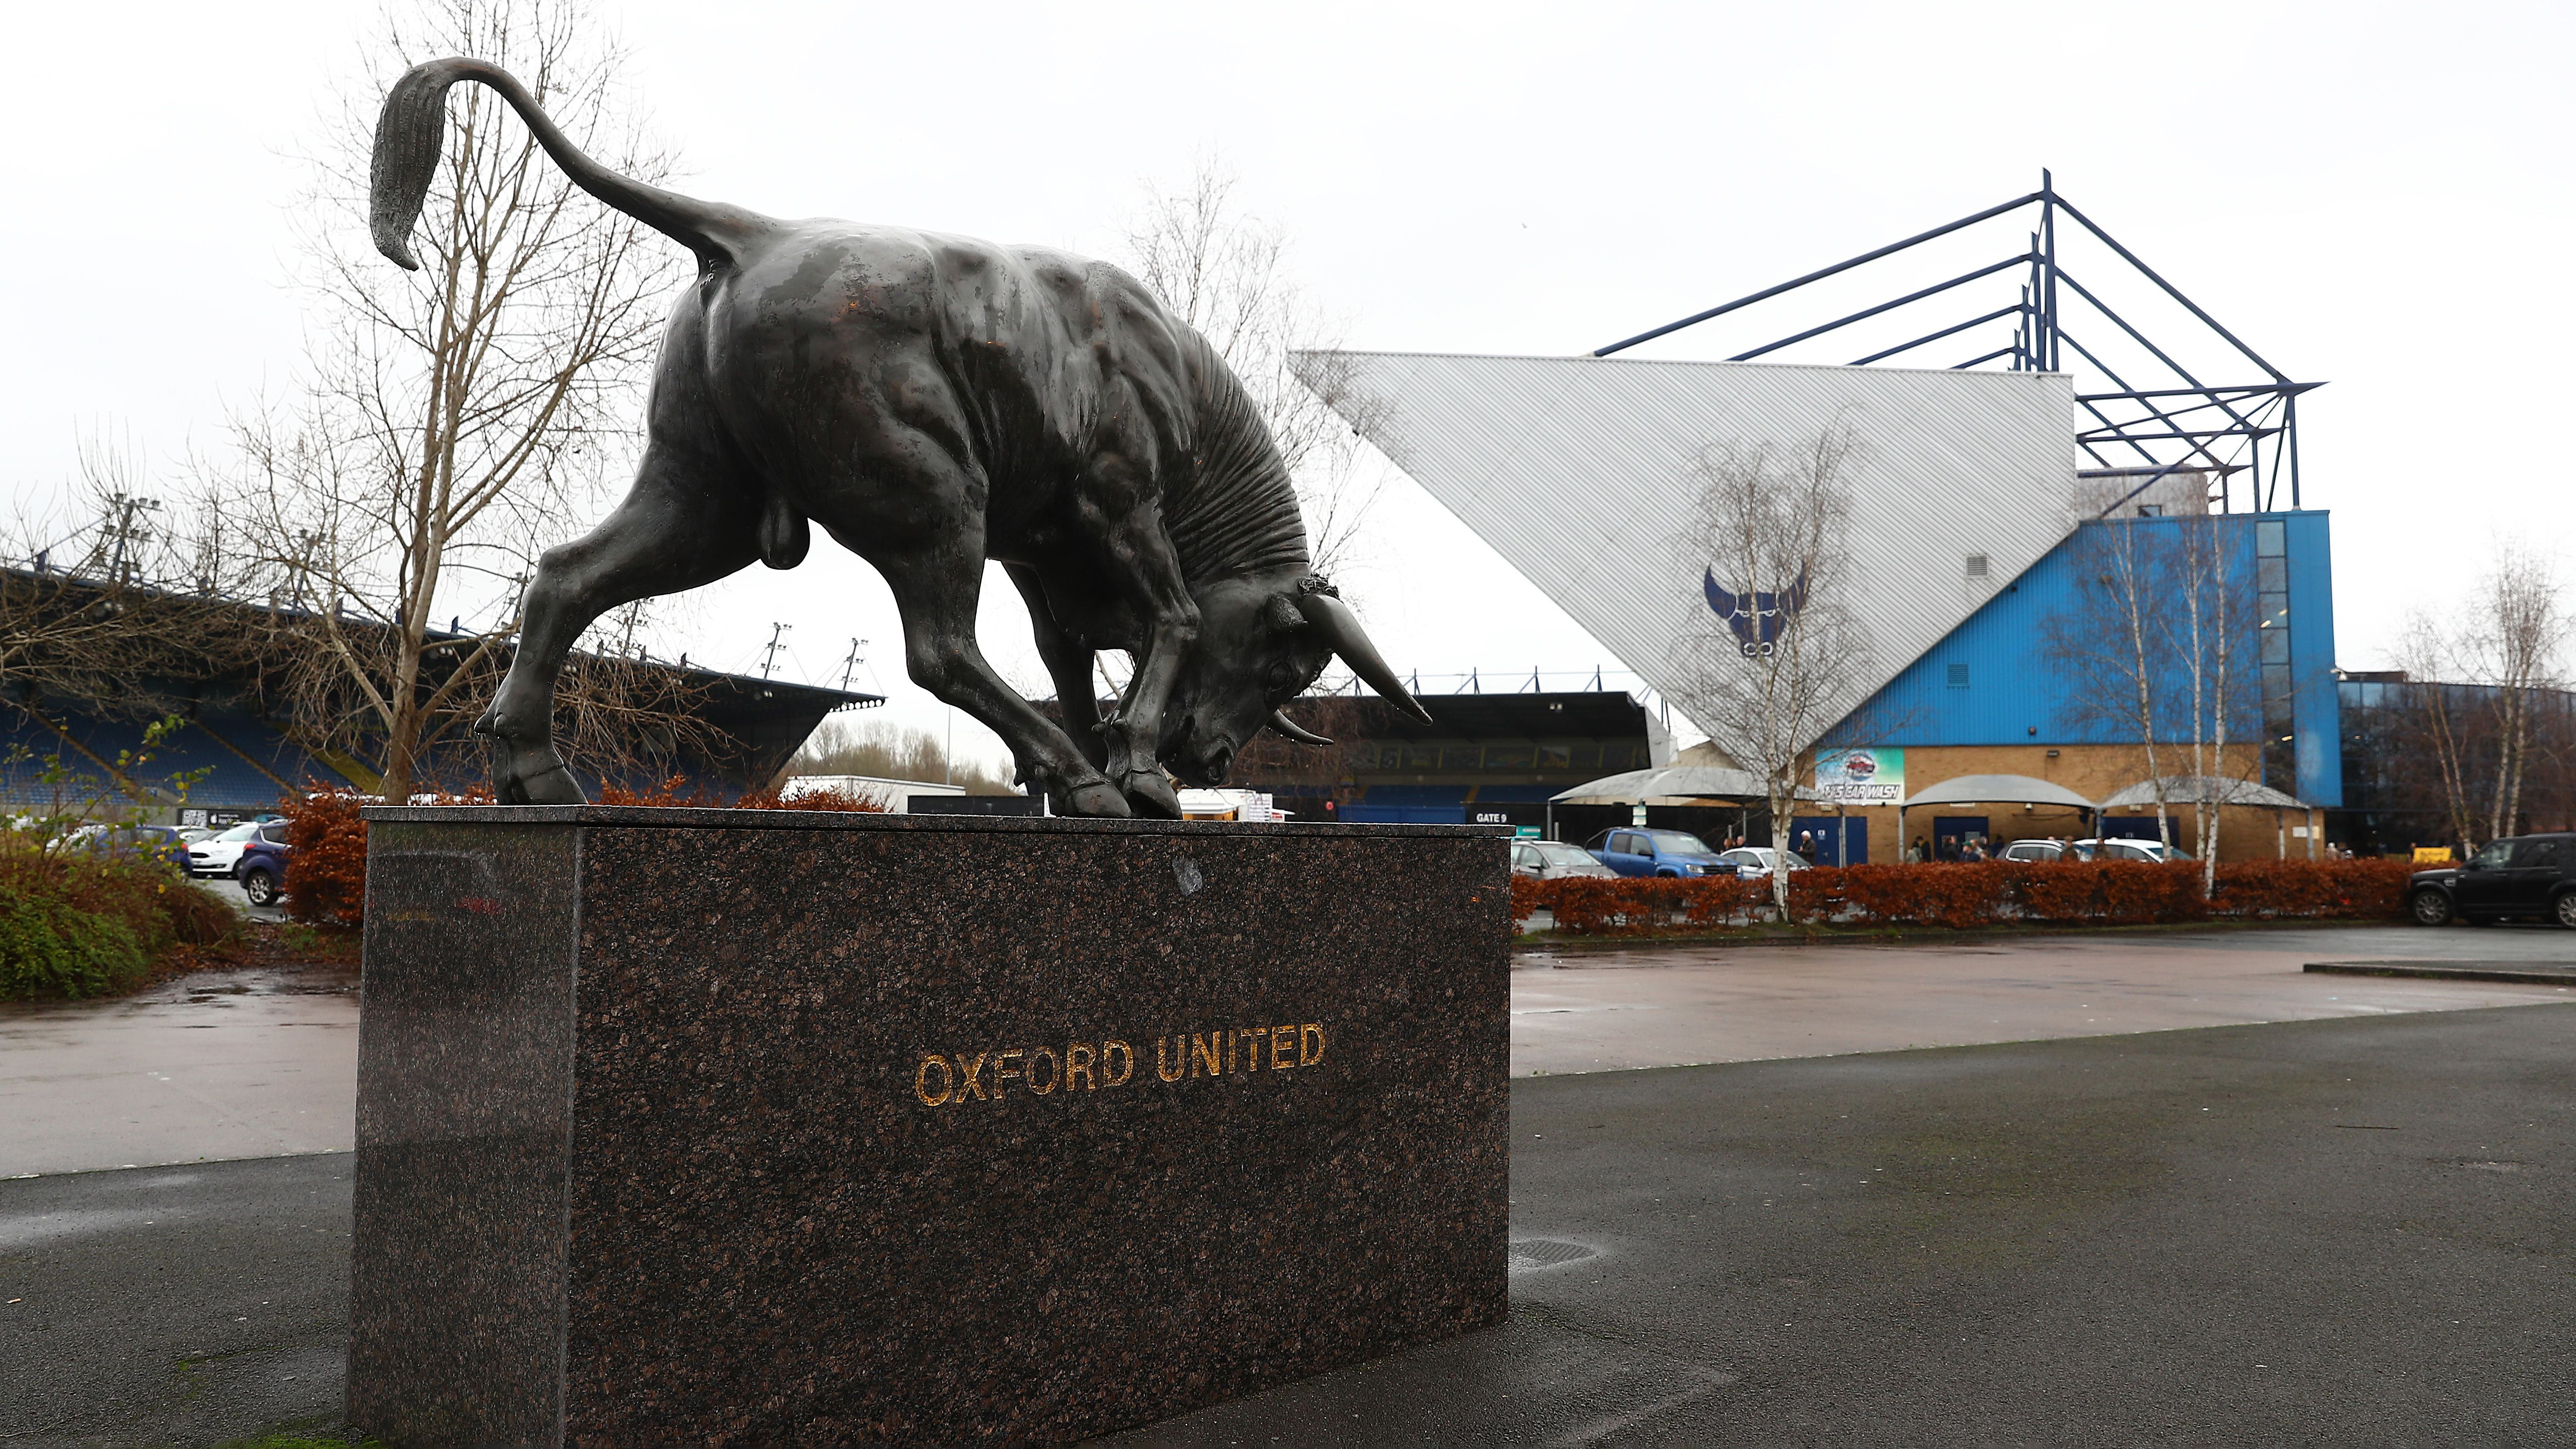 External shot of Oxford United's ground with the statue of the bull in the forefront